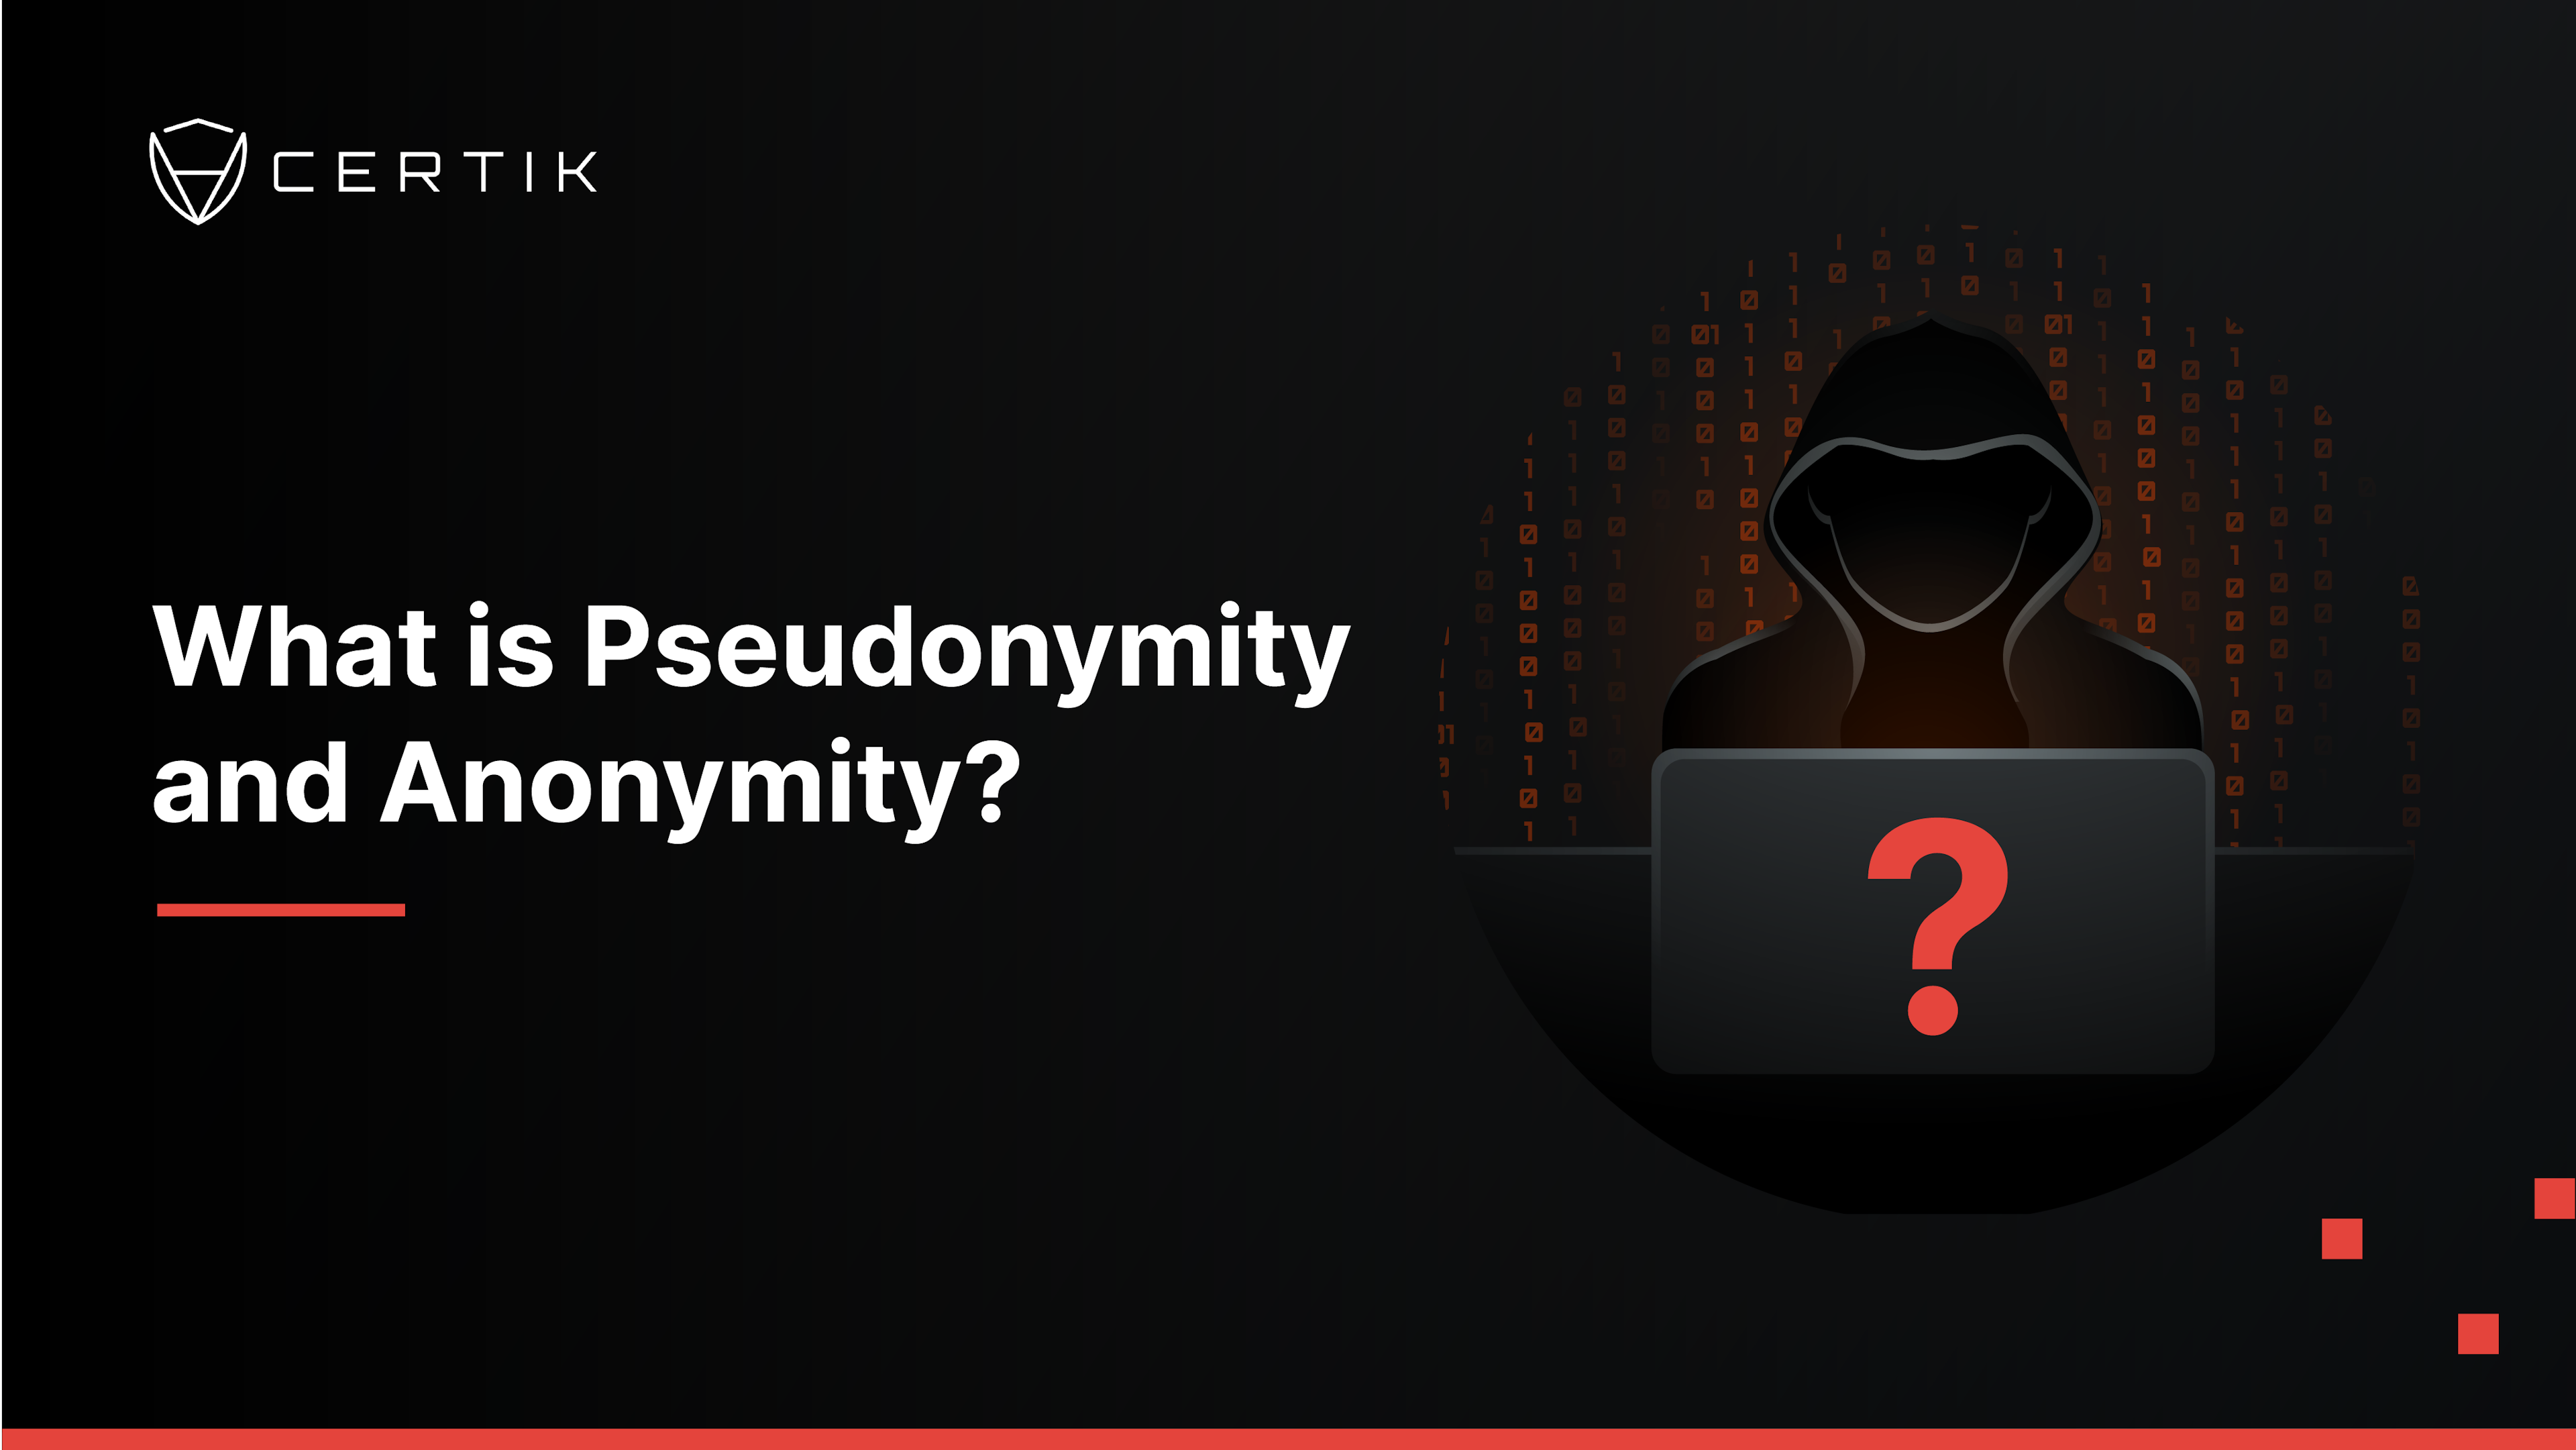 What is Pseudonymity and Anonymity?